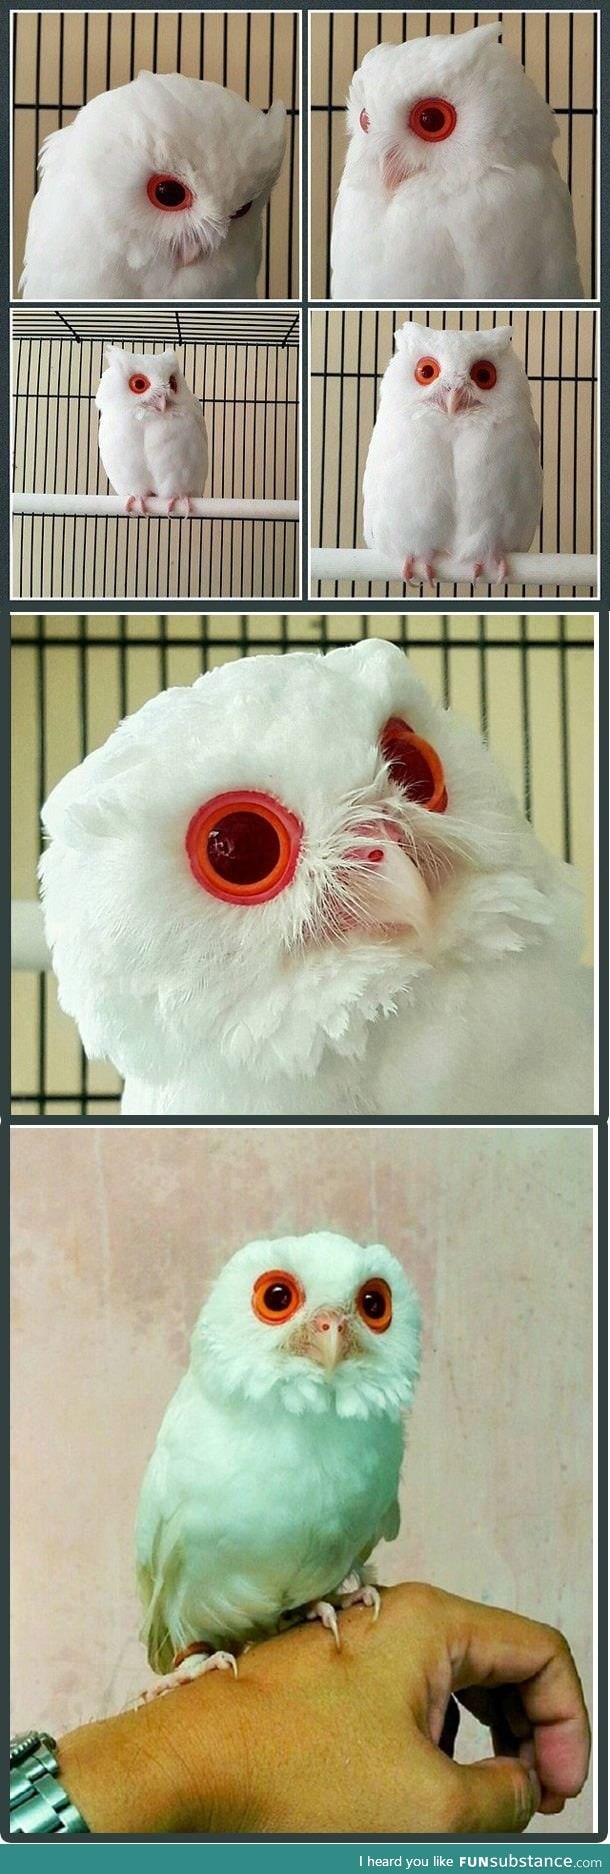 Owl albino with red eyes